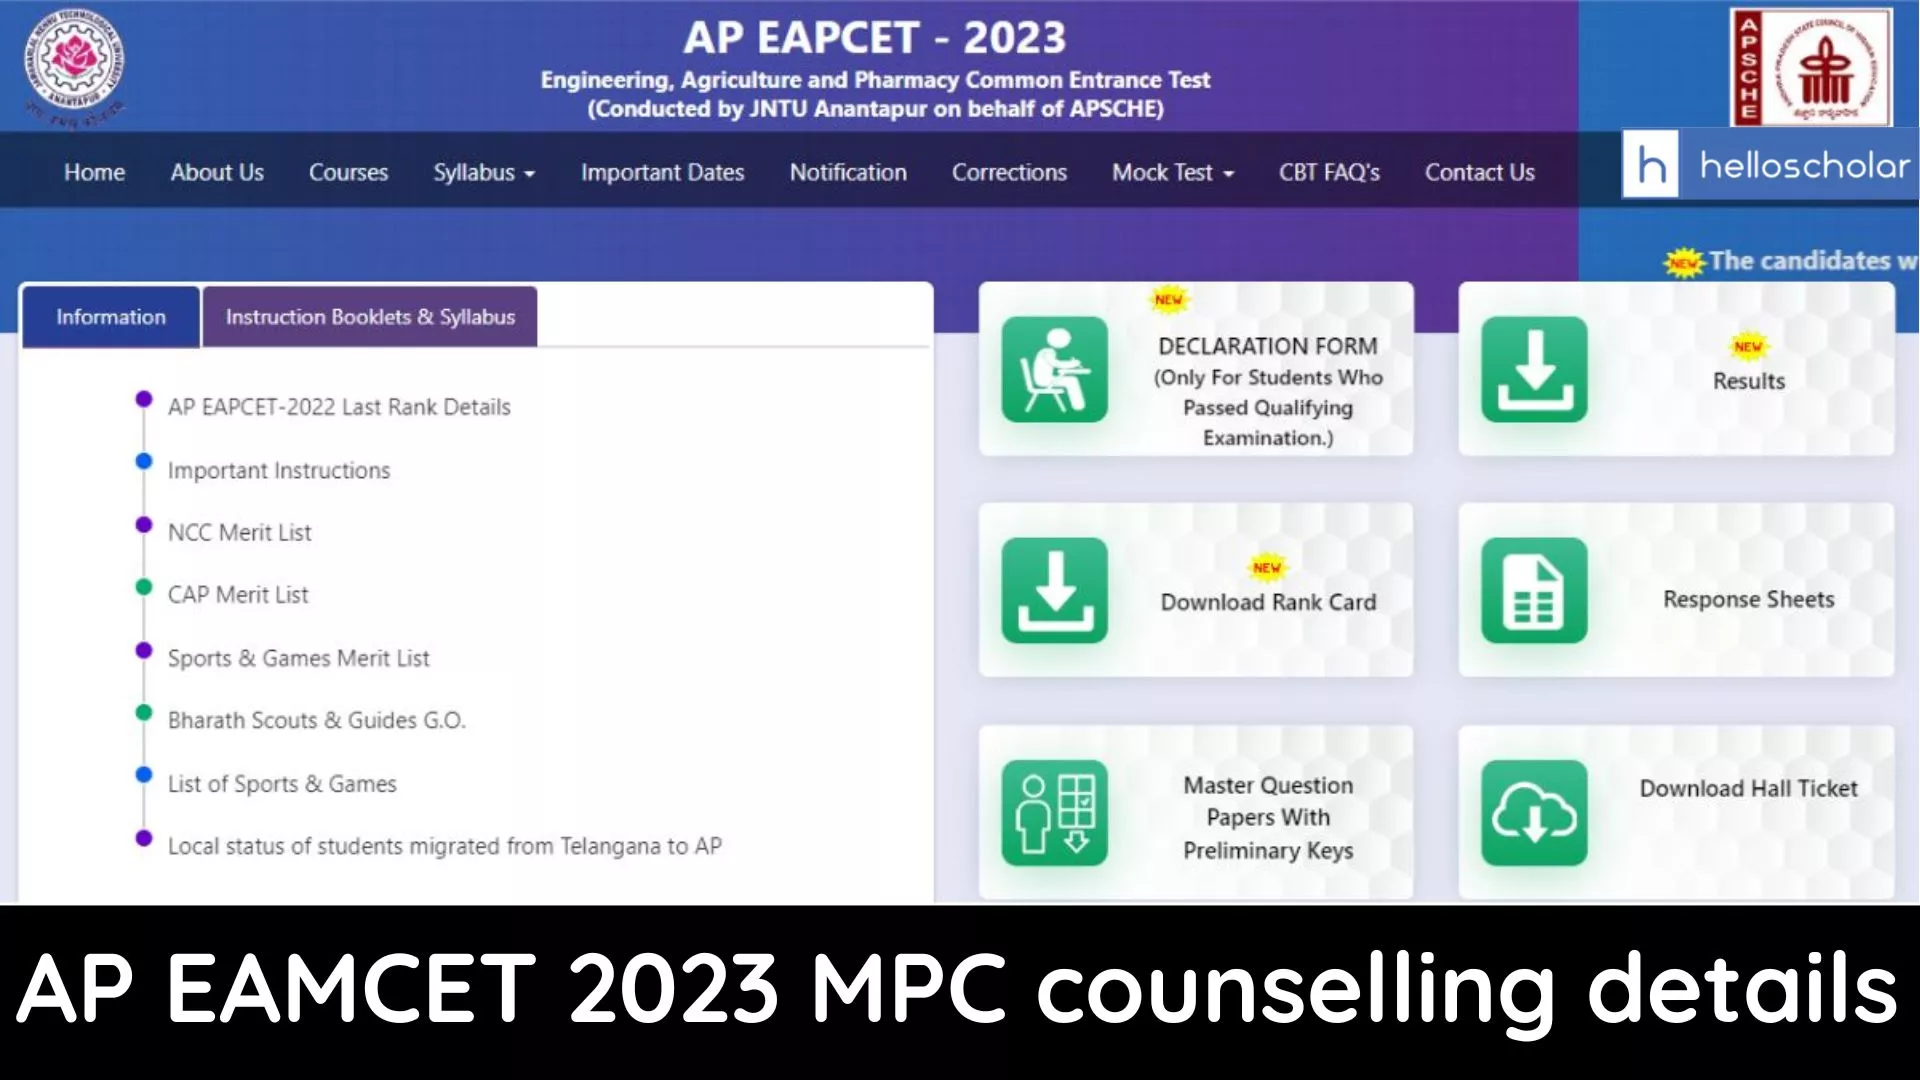 AP EAMCET 2023 MPC counselling details released, Check schedule here